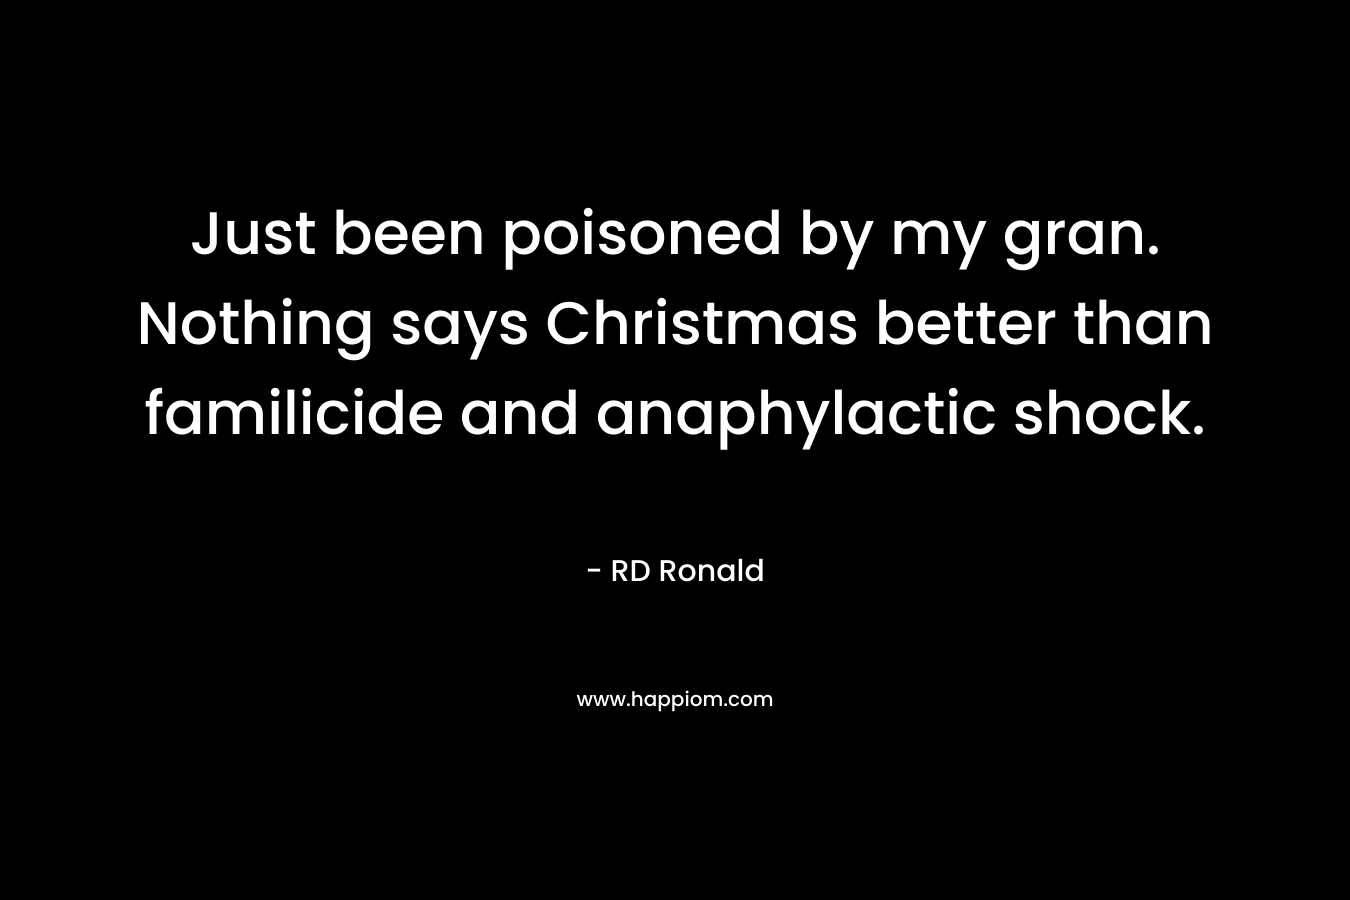 Just been poisoned by my gran. Nothing says Christmas better than familicide and anaphylactic shock.